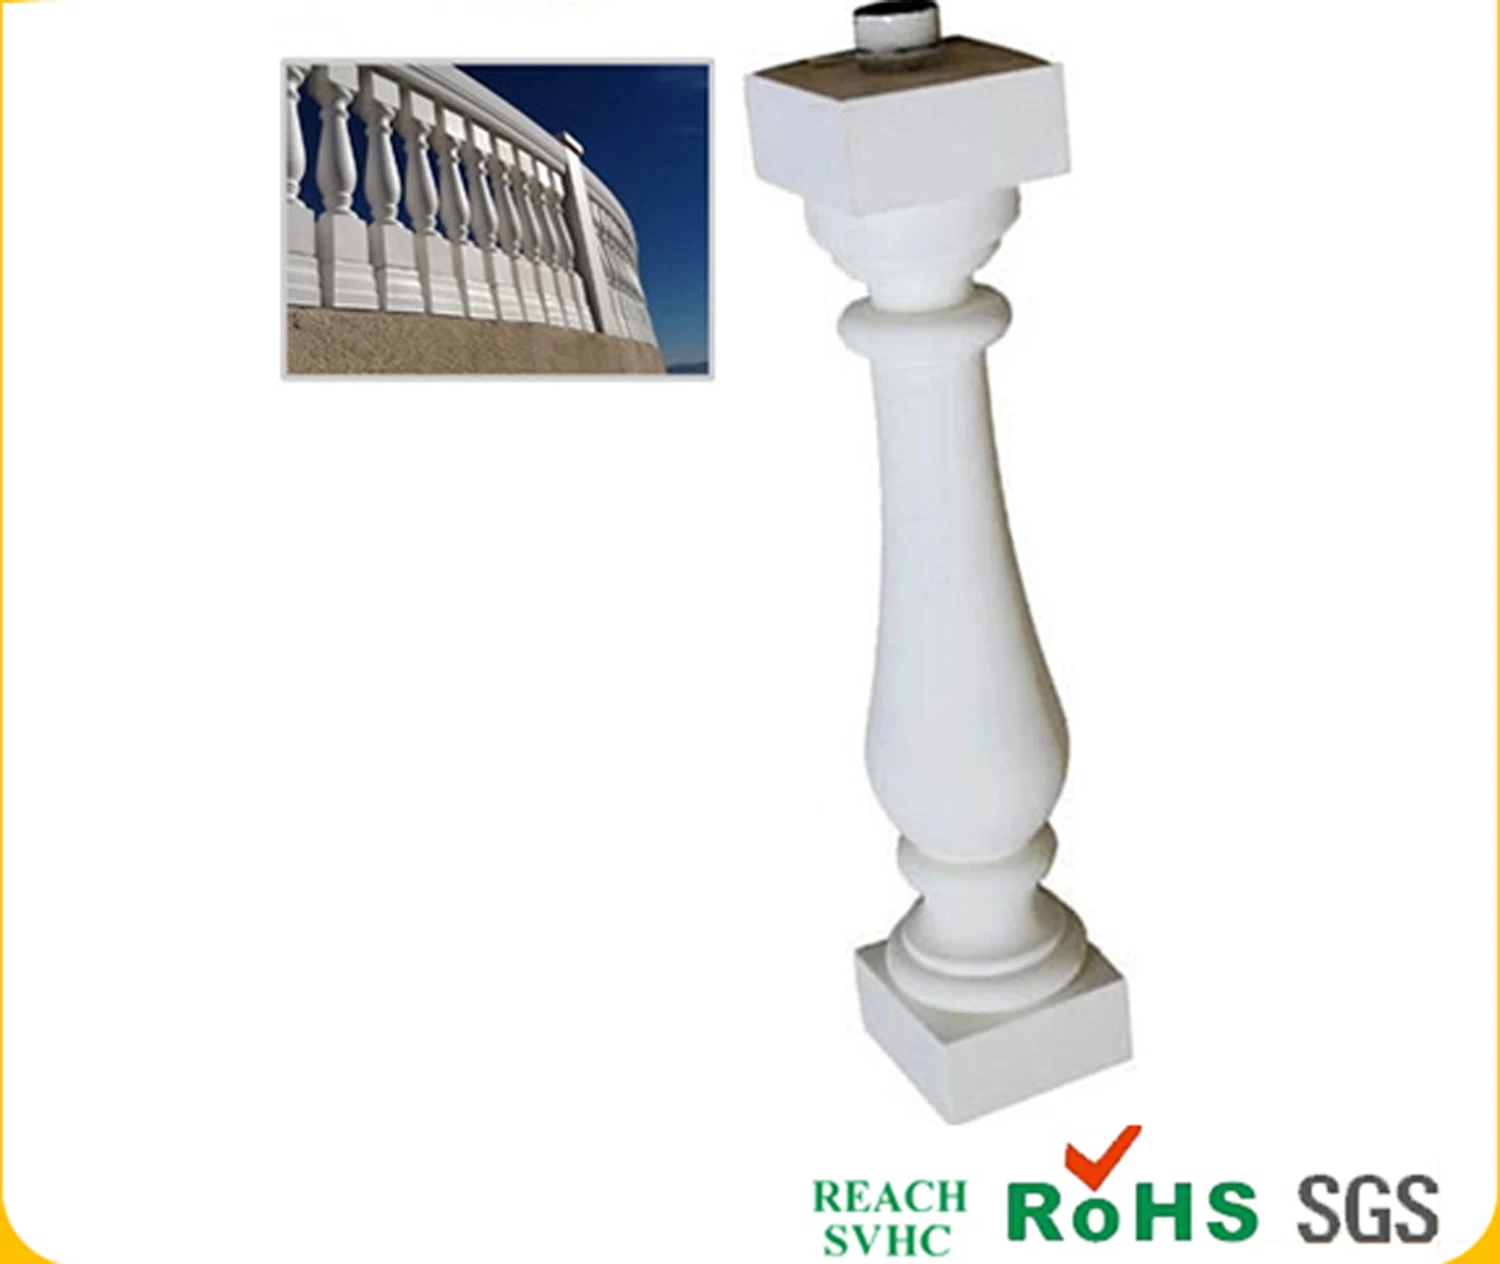 newel post,	stair newel post,	stair railing posts,	banister rails, spiral staircase